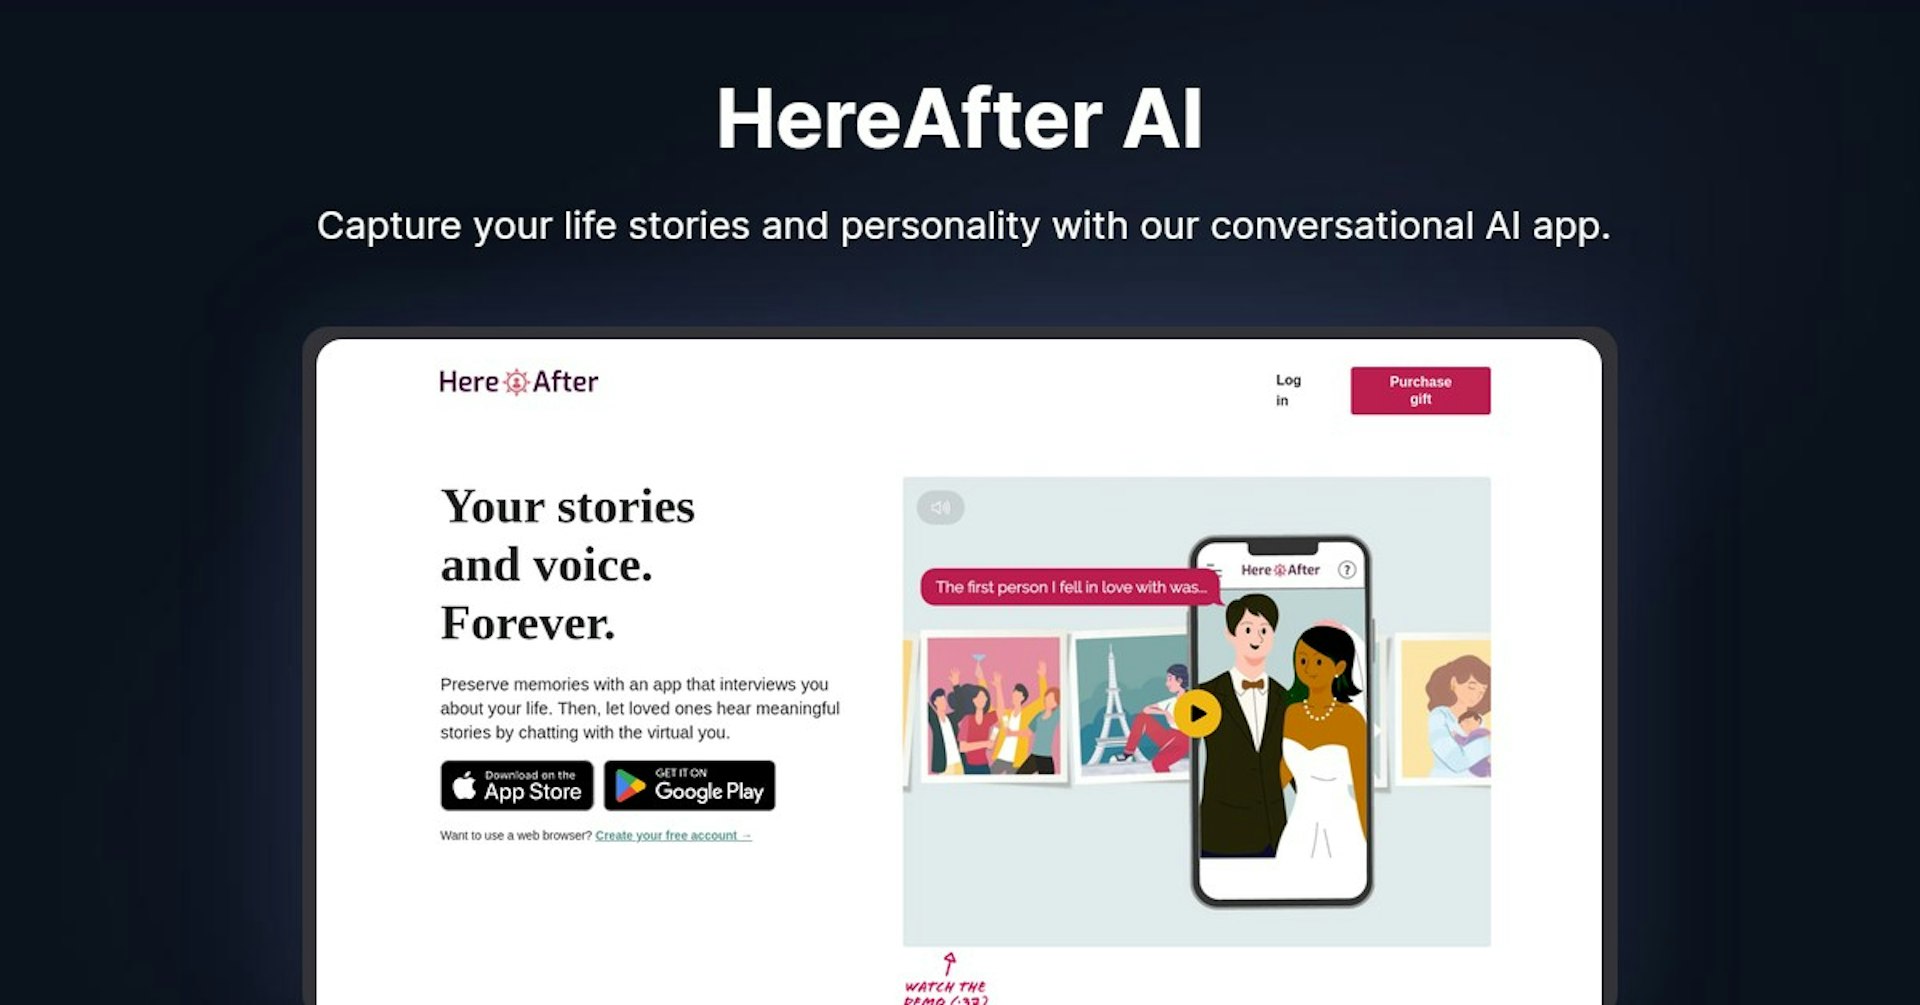 HereAfter AI